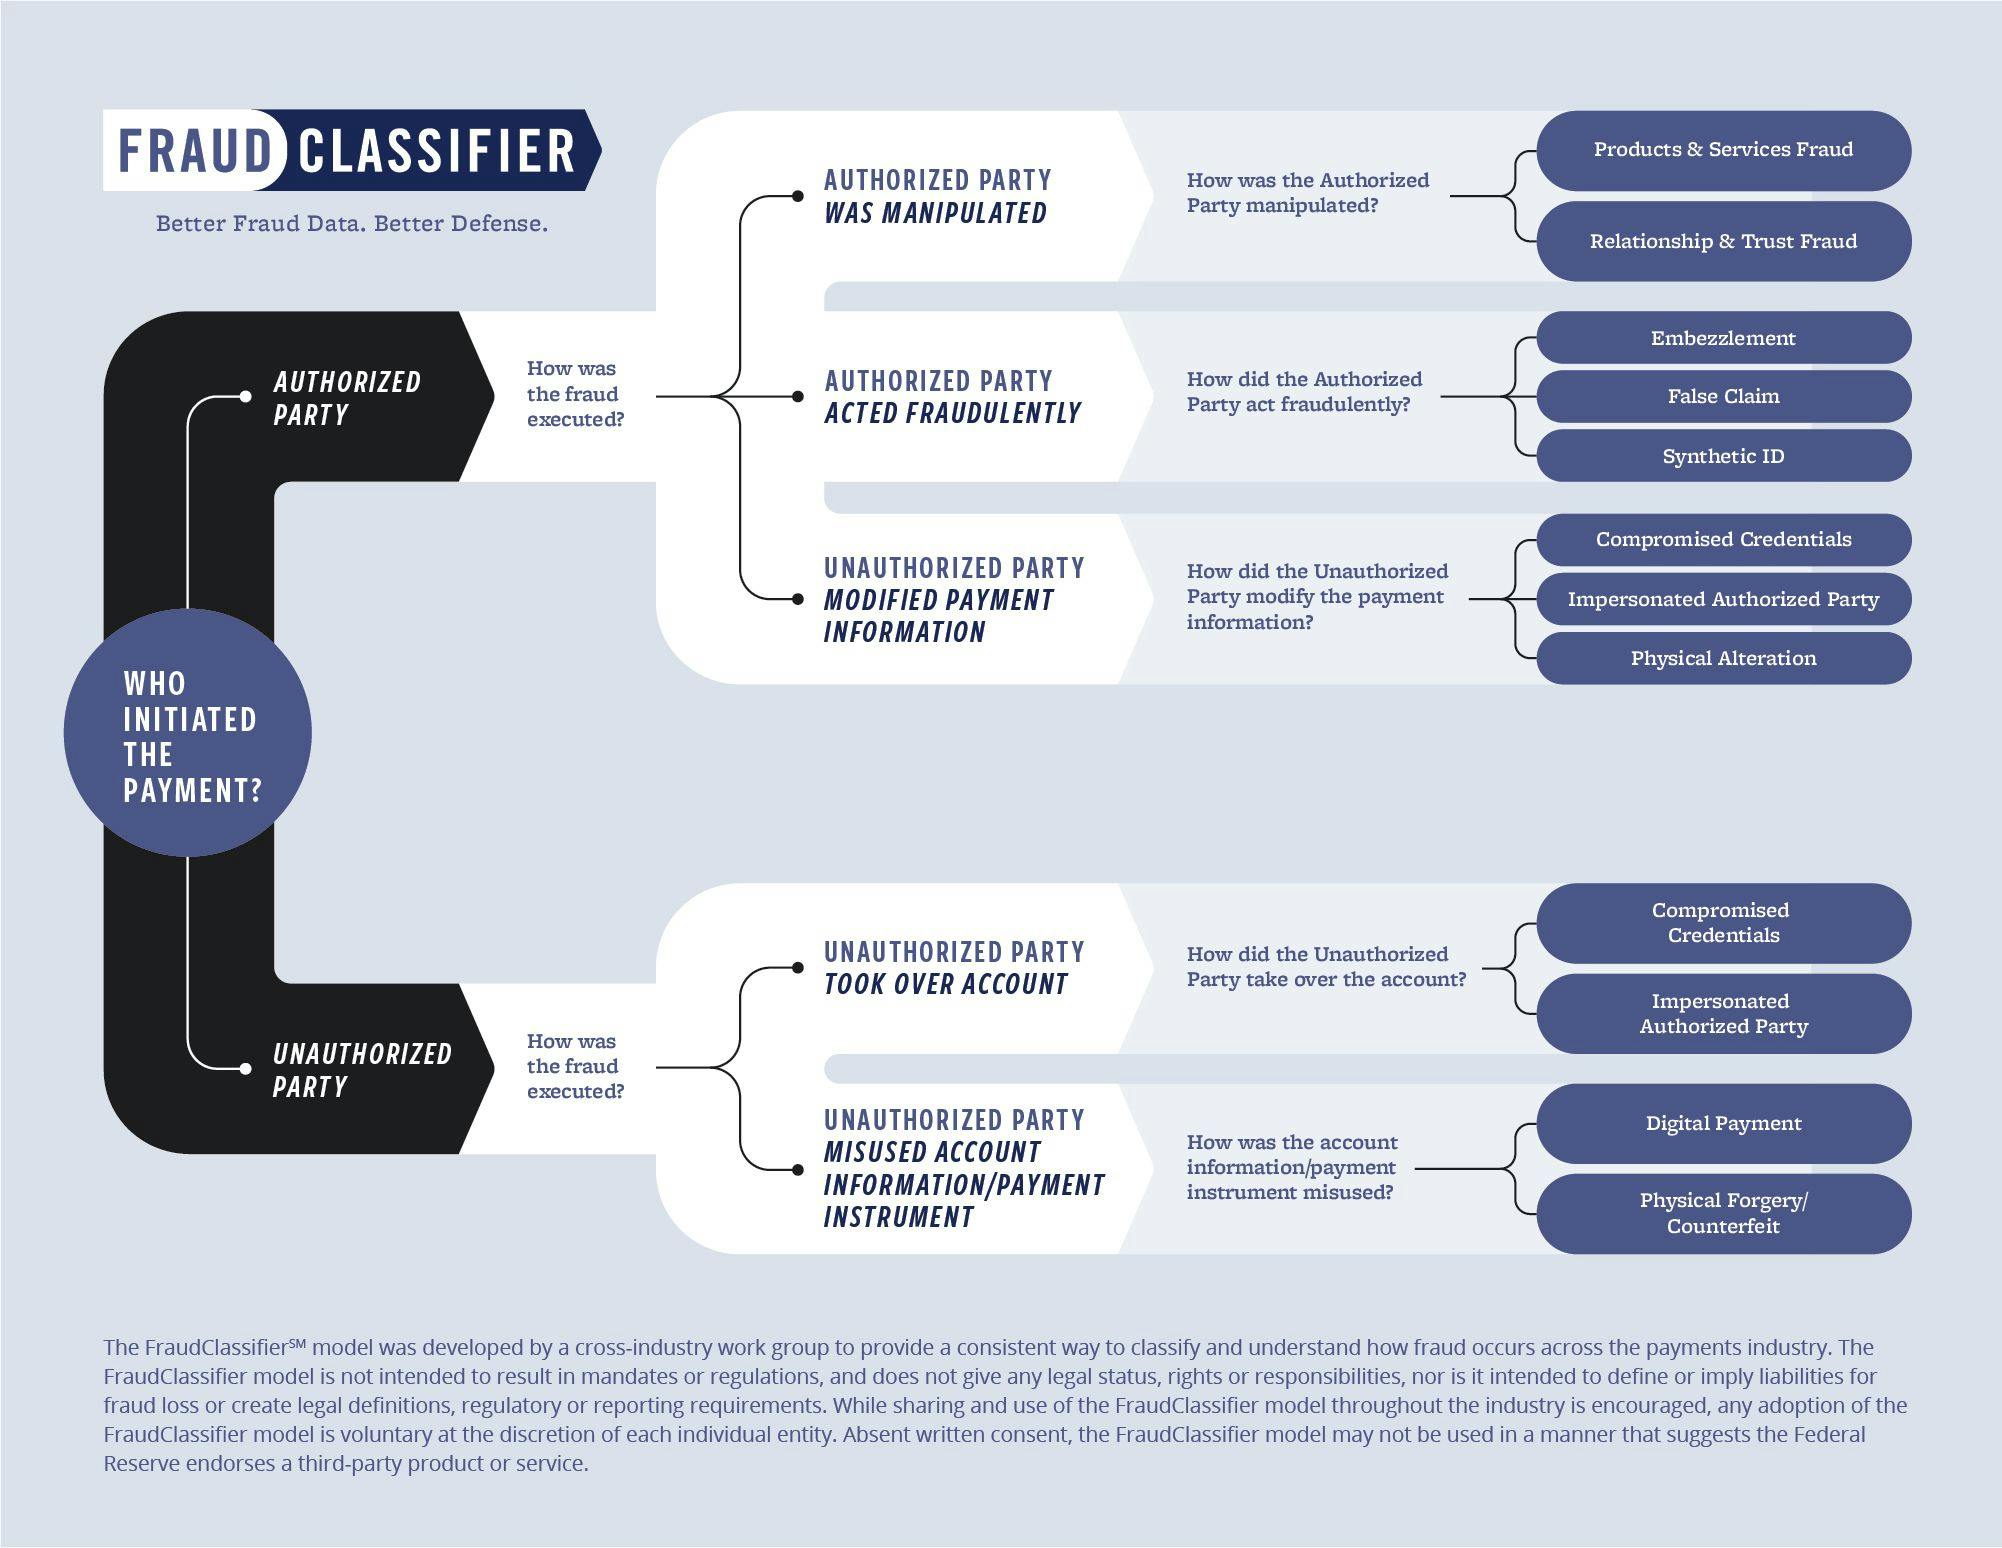 The Fed's Fraud Classifier model is useful for understanding and minimizing faster payments fraud.